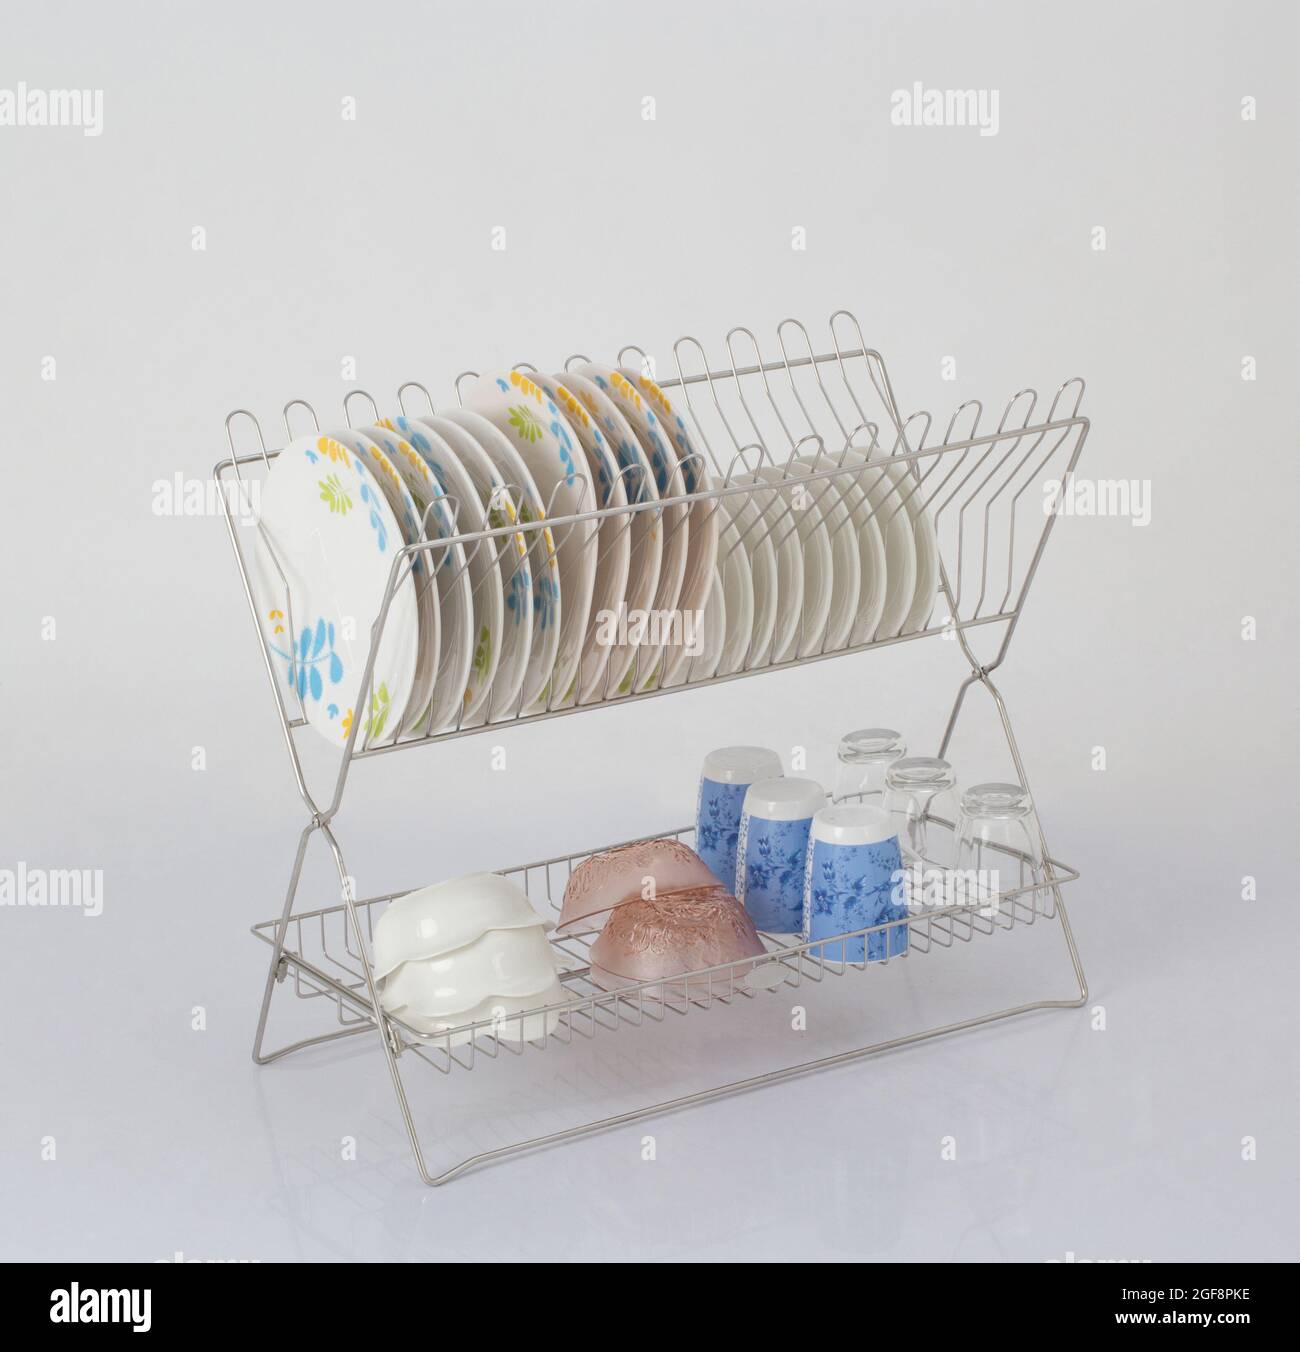 https://c8.alamy.com/comp/2GF8PKE/stainless-steel-shelf-for-keeping-dishes-and-cups-on-white-background-2GF8PKE.jpg